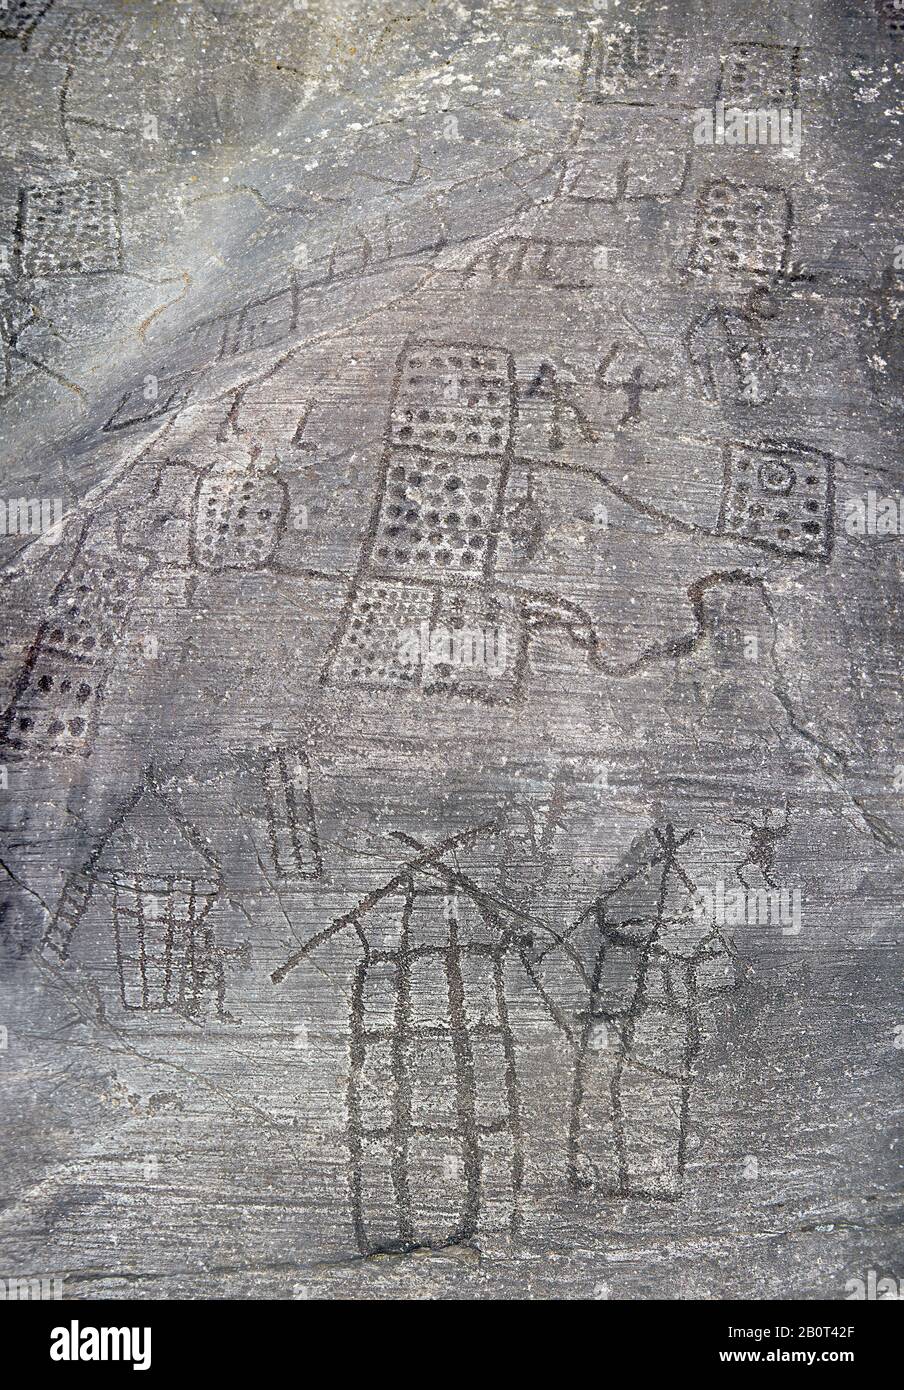 Prehistoric Petroglyph, rock carving, of what is known as the Map of Bebolina with depictions of huts raised on wooden poles and field systems carved Stock Photo